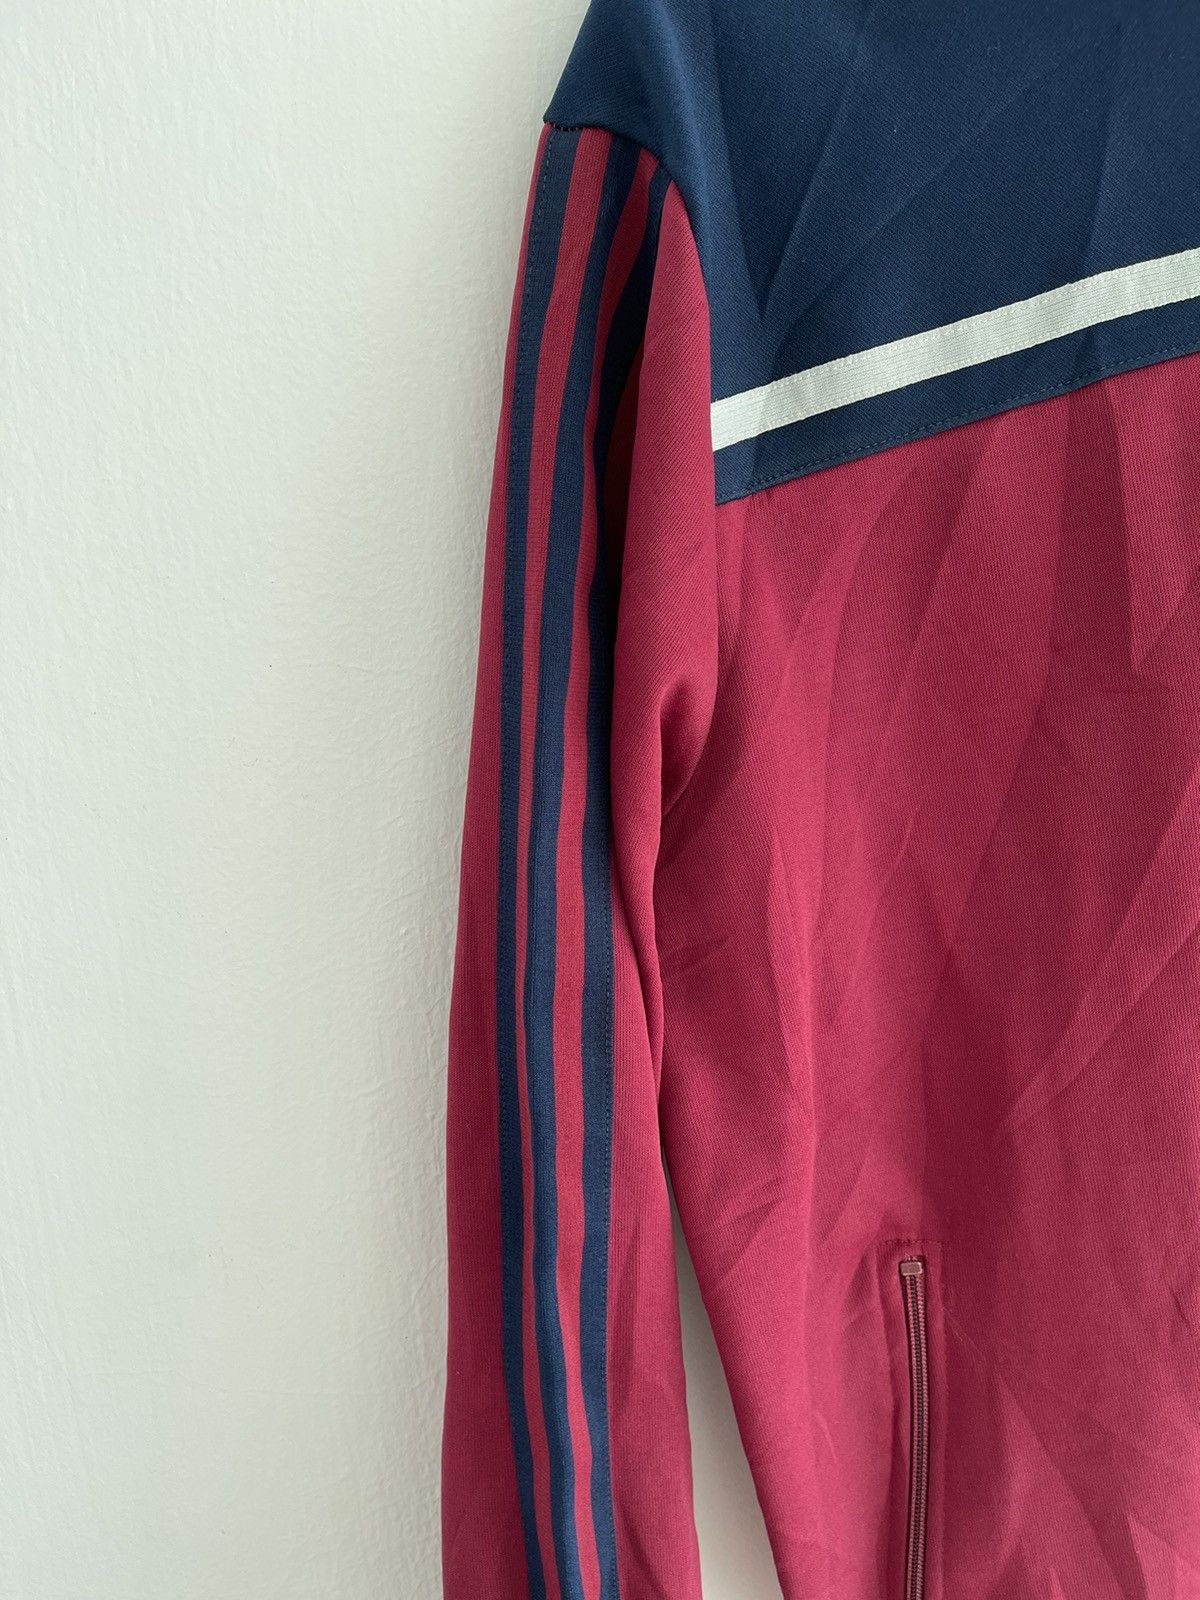 Adidas Vintage Track Top Jacket Made in Taiwan - 7